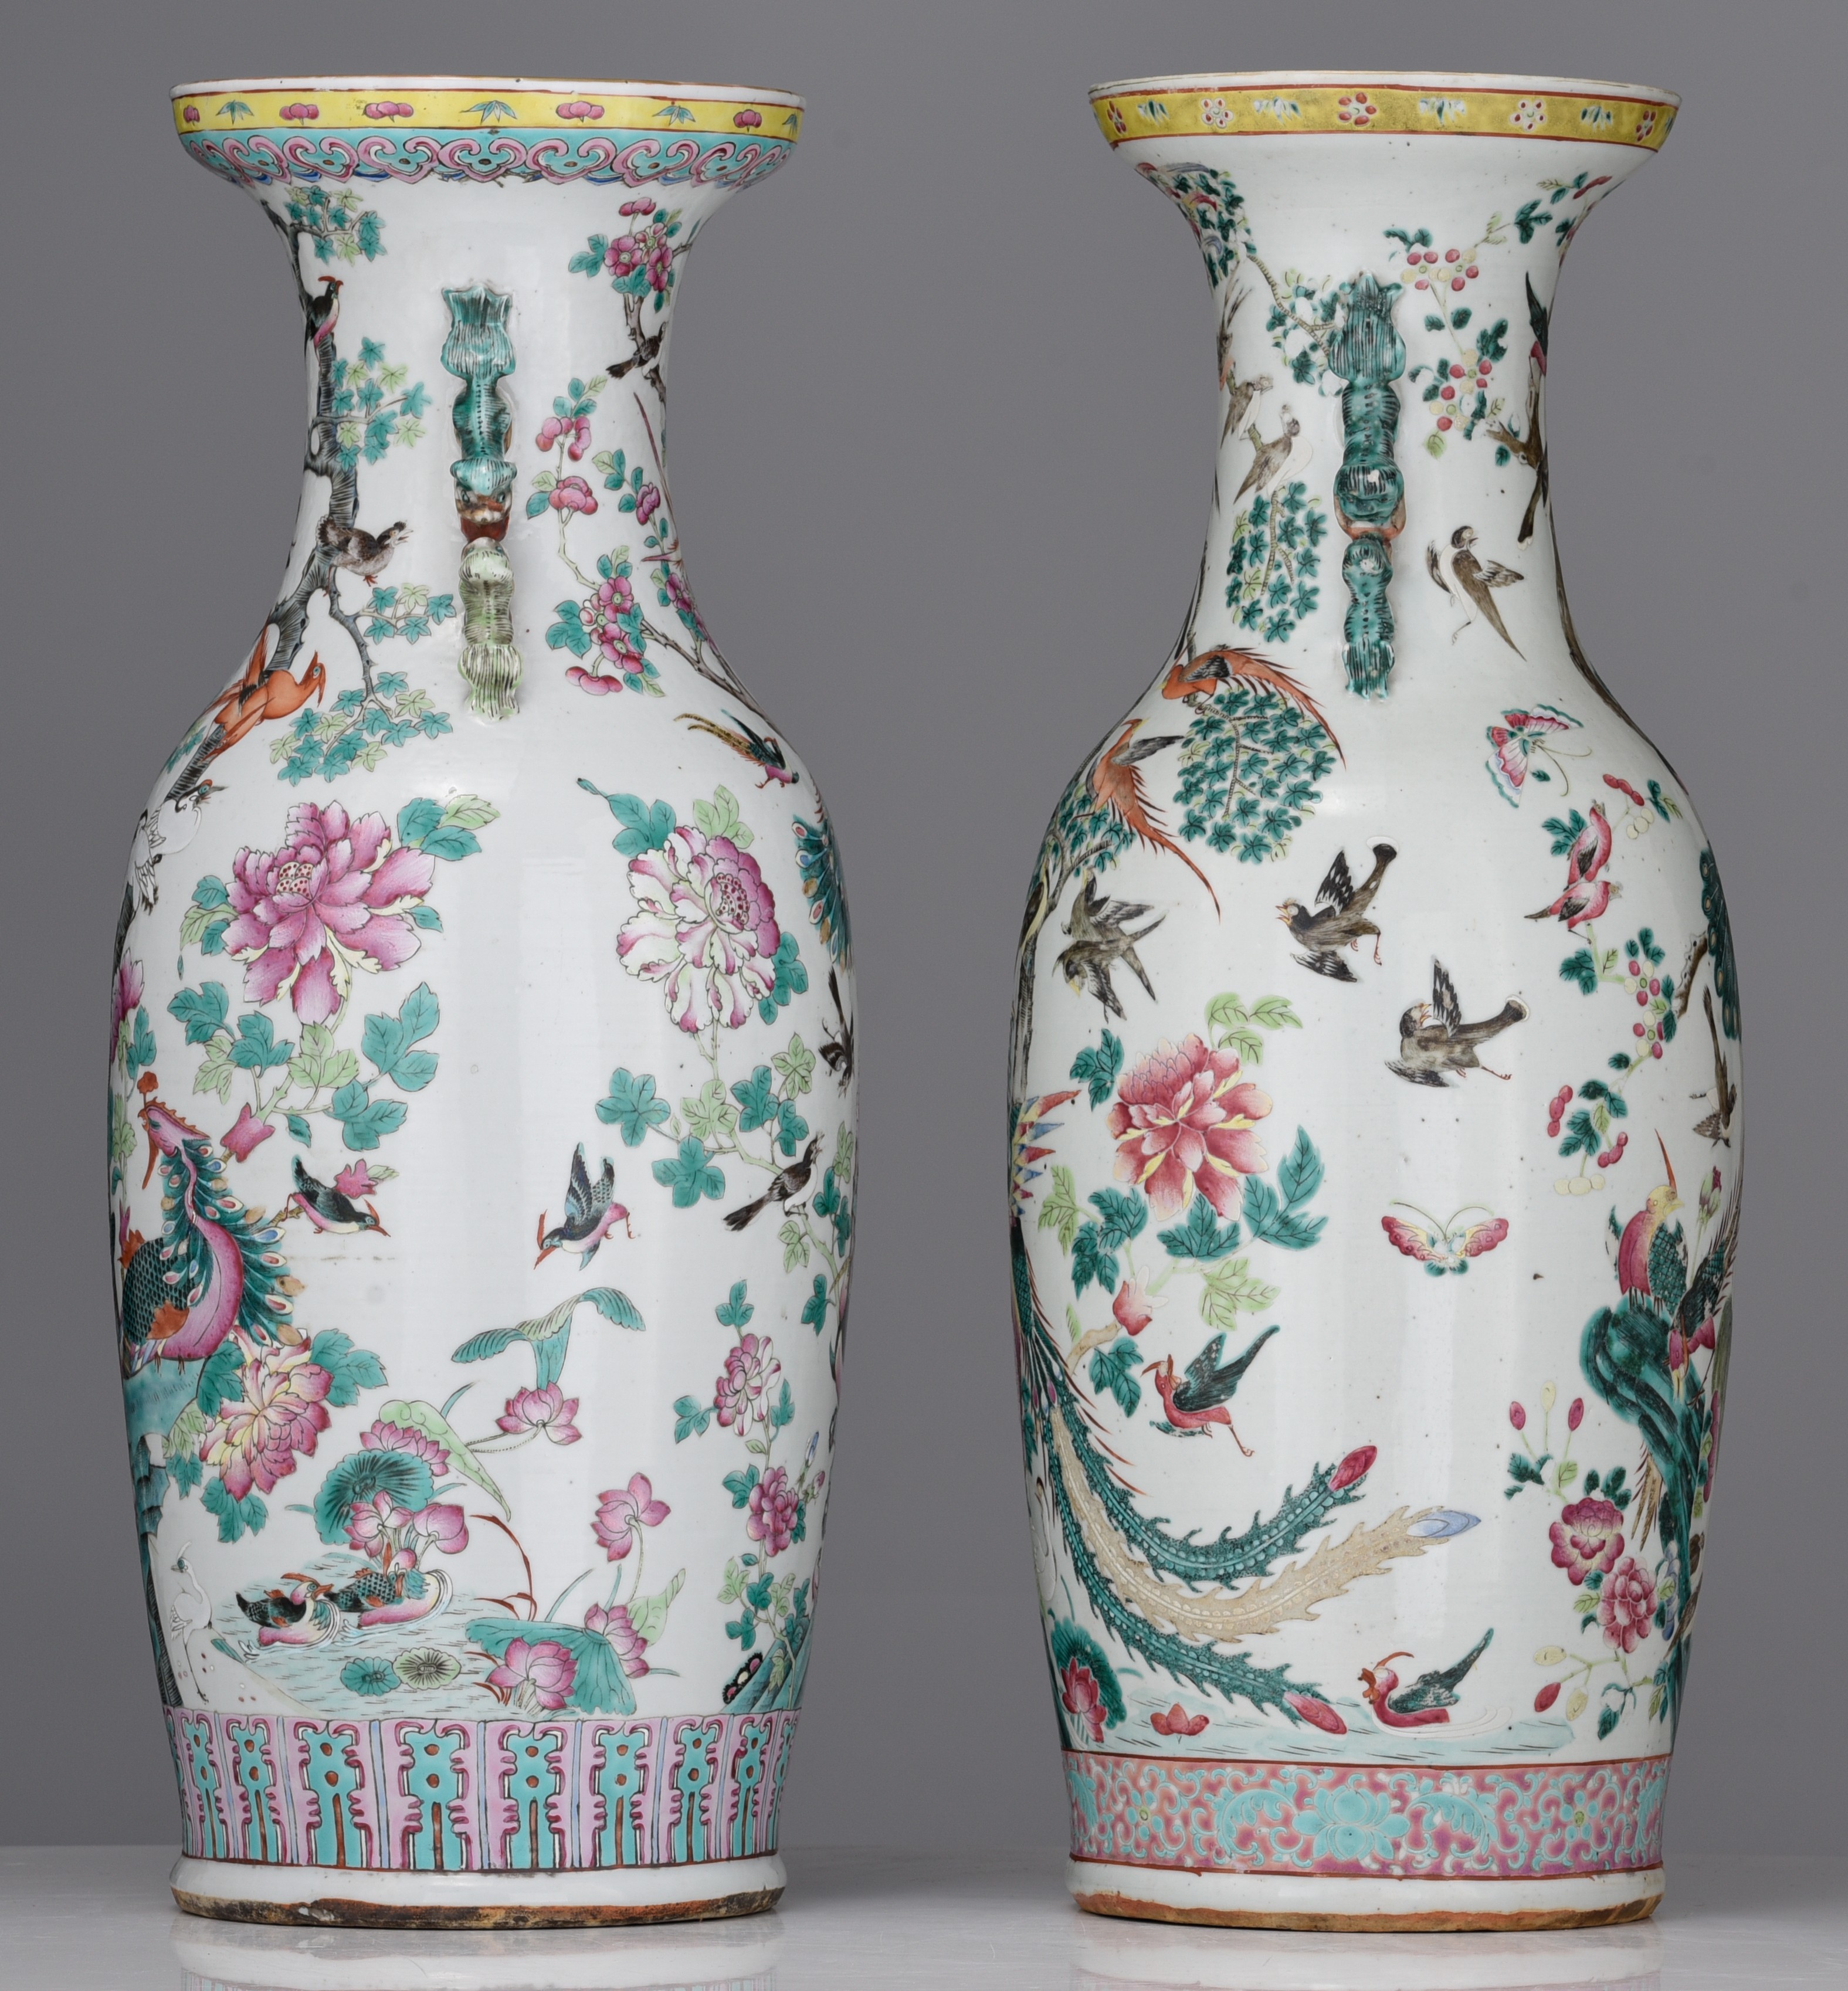 A similar pair of Chinese famille rose 'One Hundred Birds' vases, 19thC, H 62 cm - Image 3 of 7